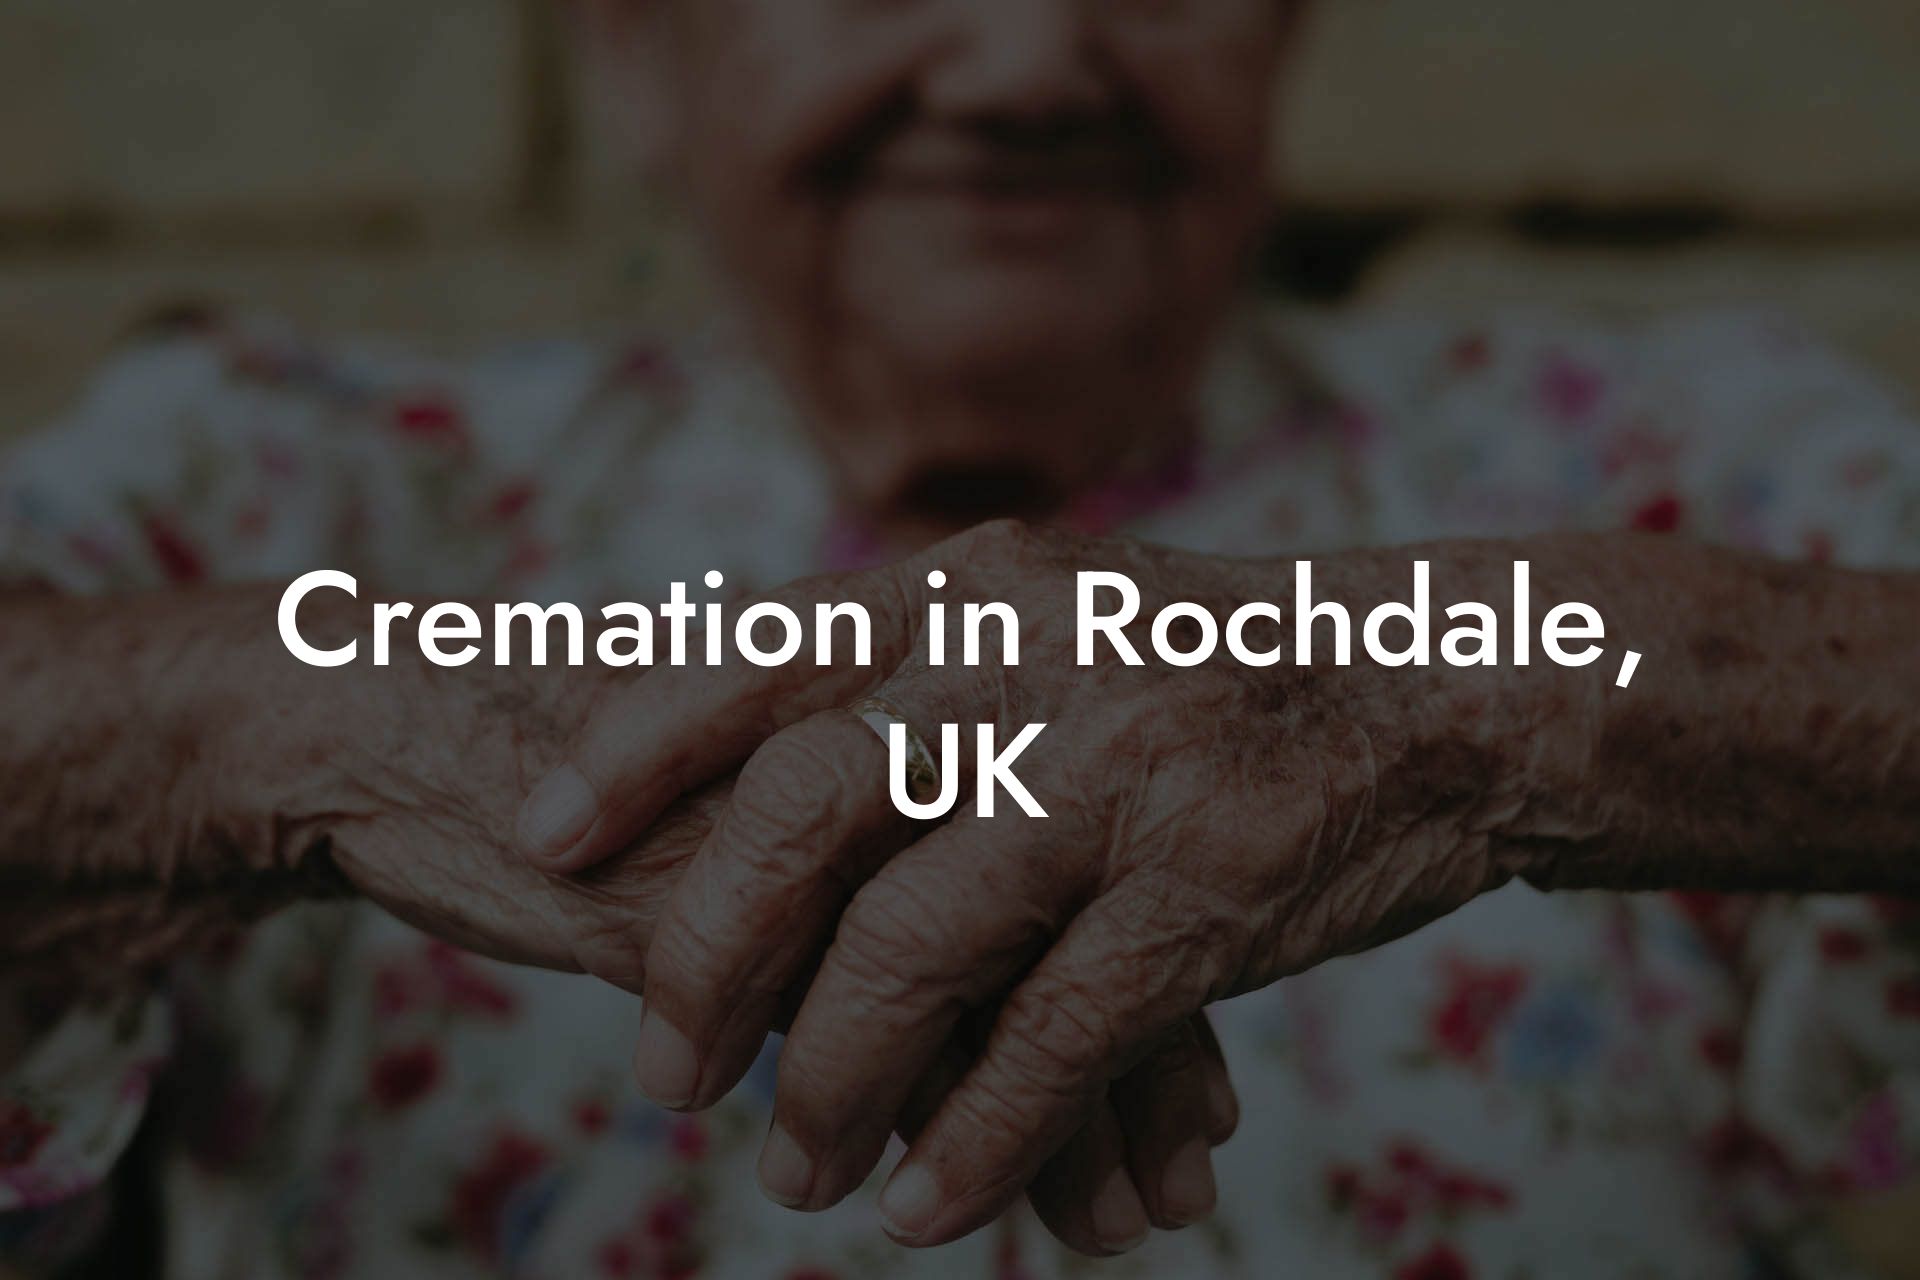 Cremation in Rochdale, UK